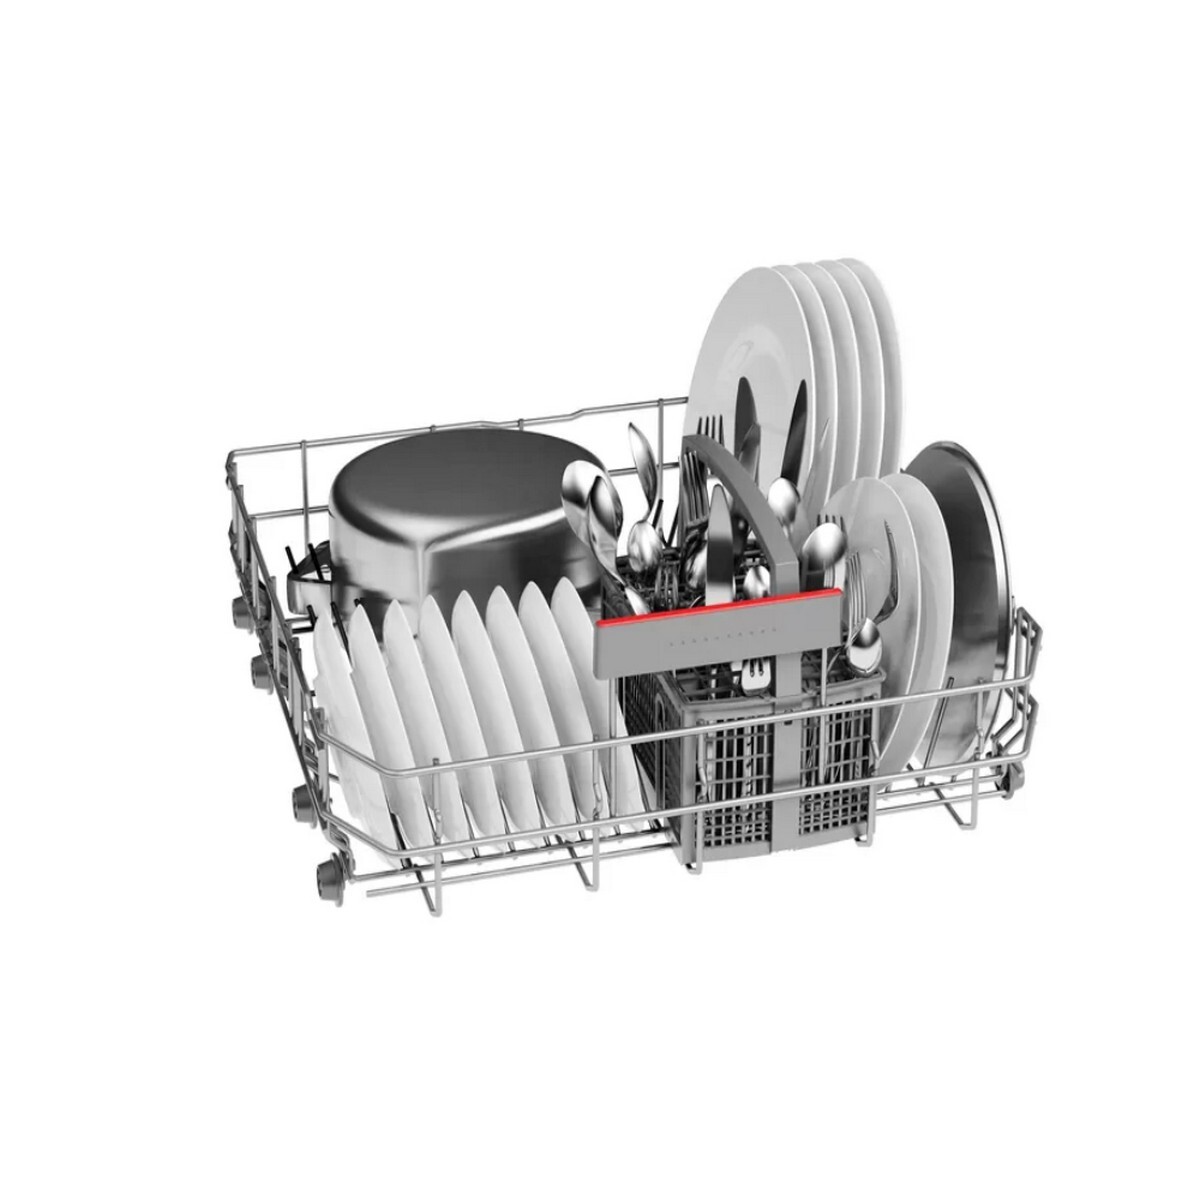 Bosch Dish Washer SMS6ITW00I 13 Place Setting White